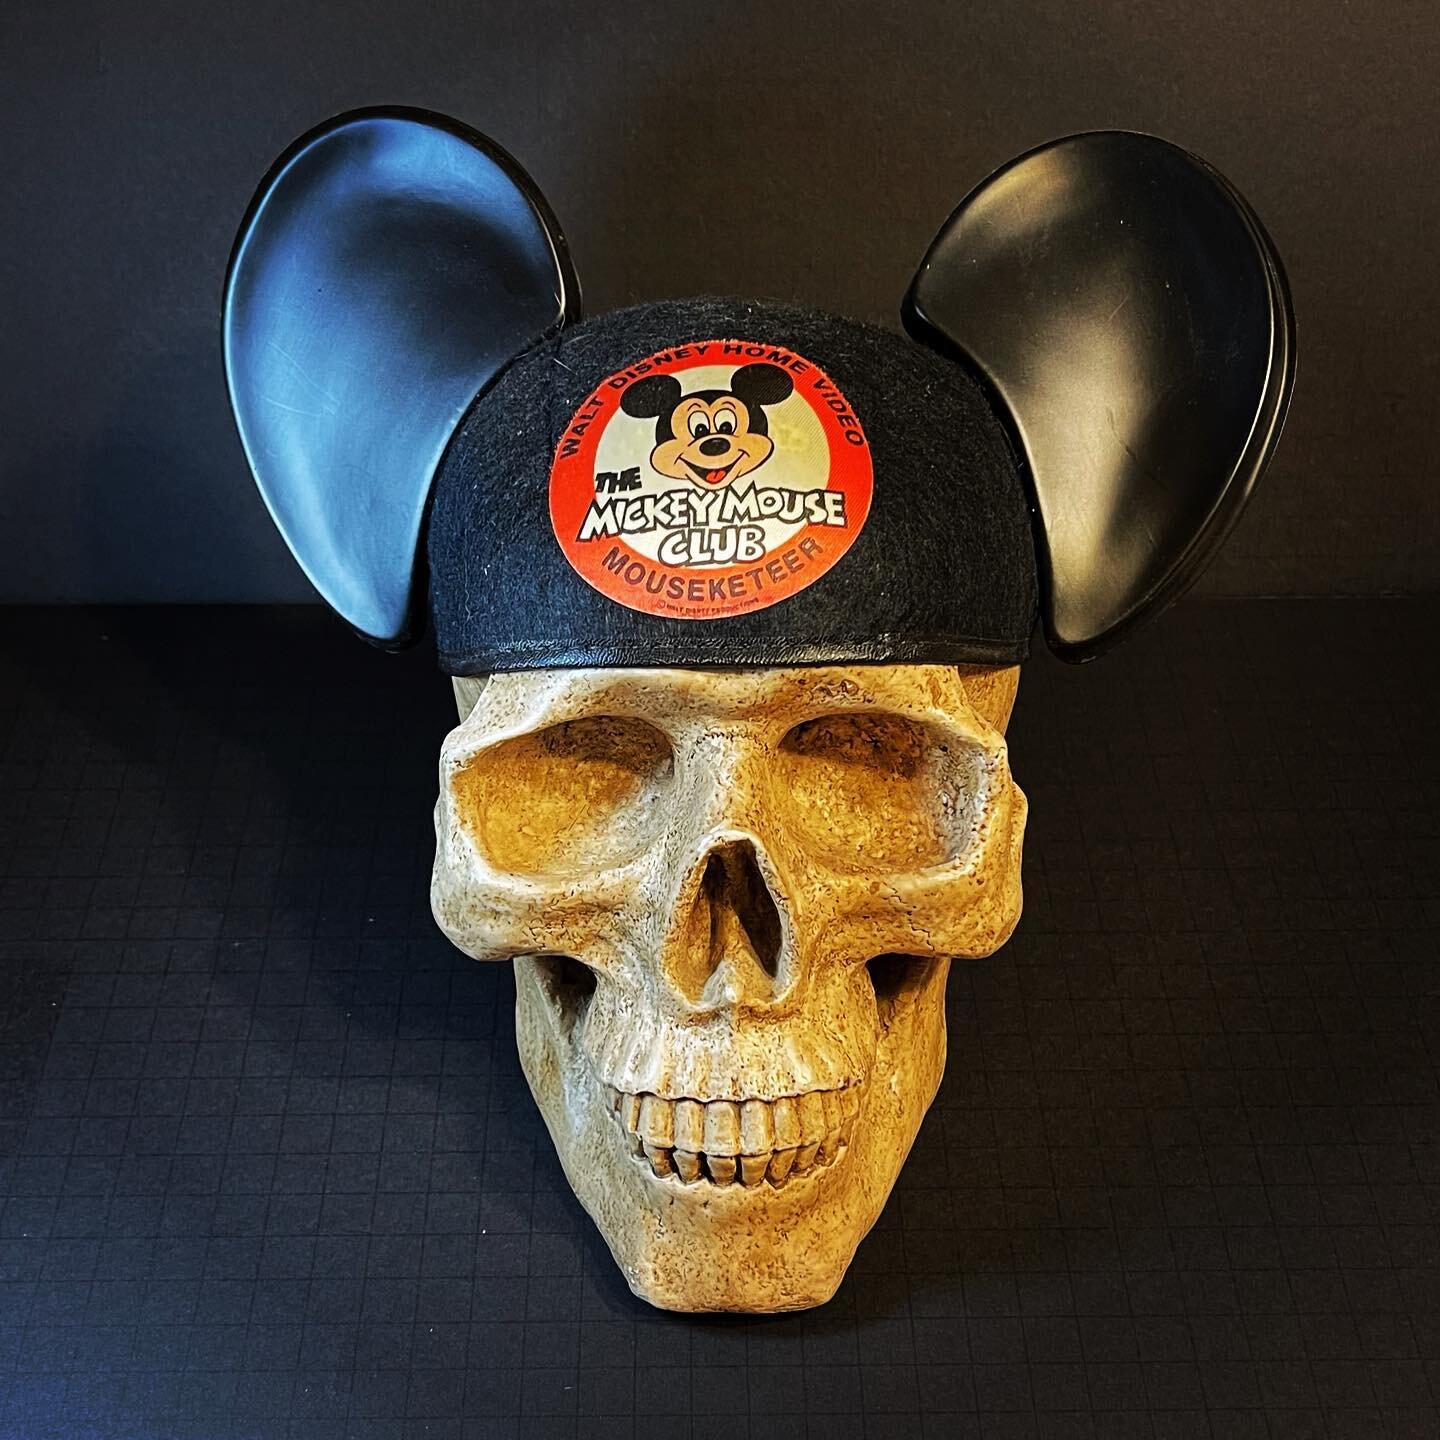 Never forget boys and girls, Walt Disney wants you dead 💀 

(Original Mouseketeer cap promoting Walt Disney Home Video, 1983)

#audiovideoplusarchives #waltdisneyhomevideo #vhscollectors #vhspromo #videostorepromo